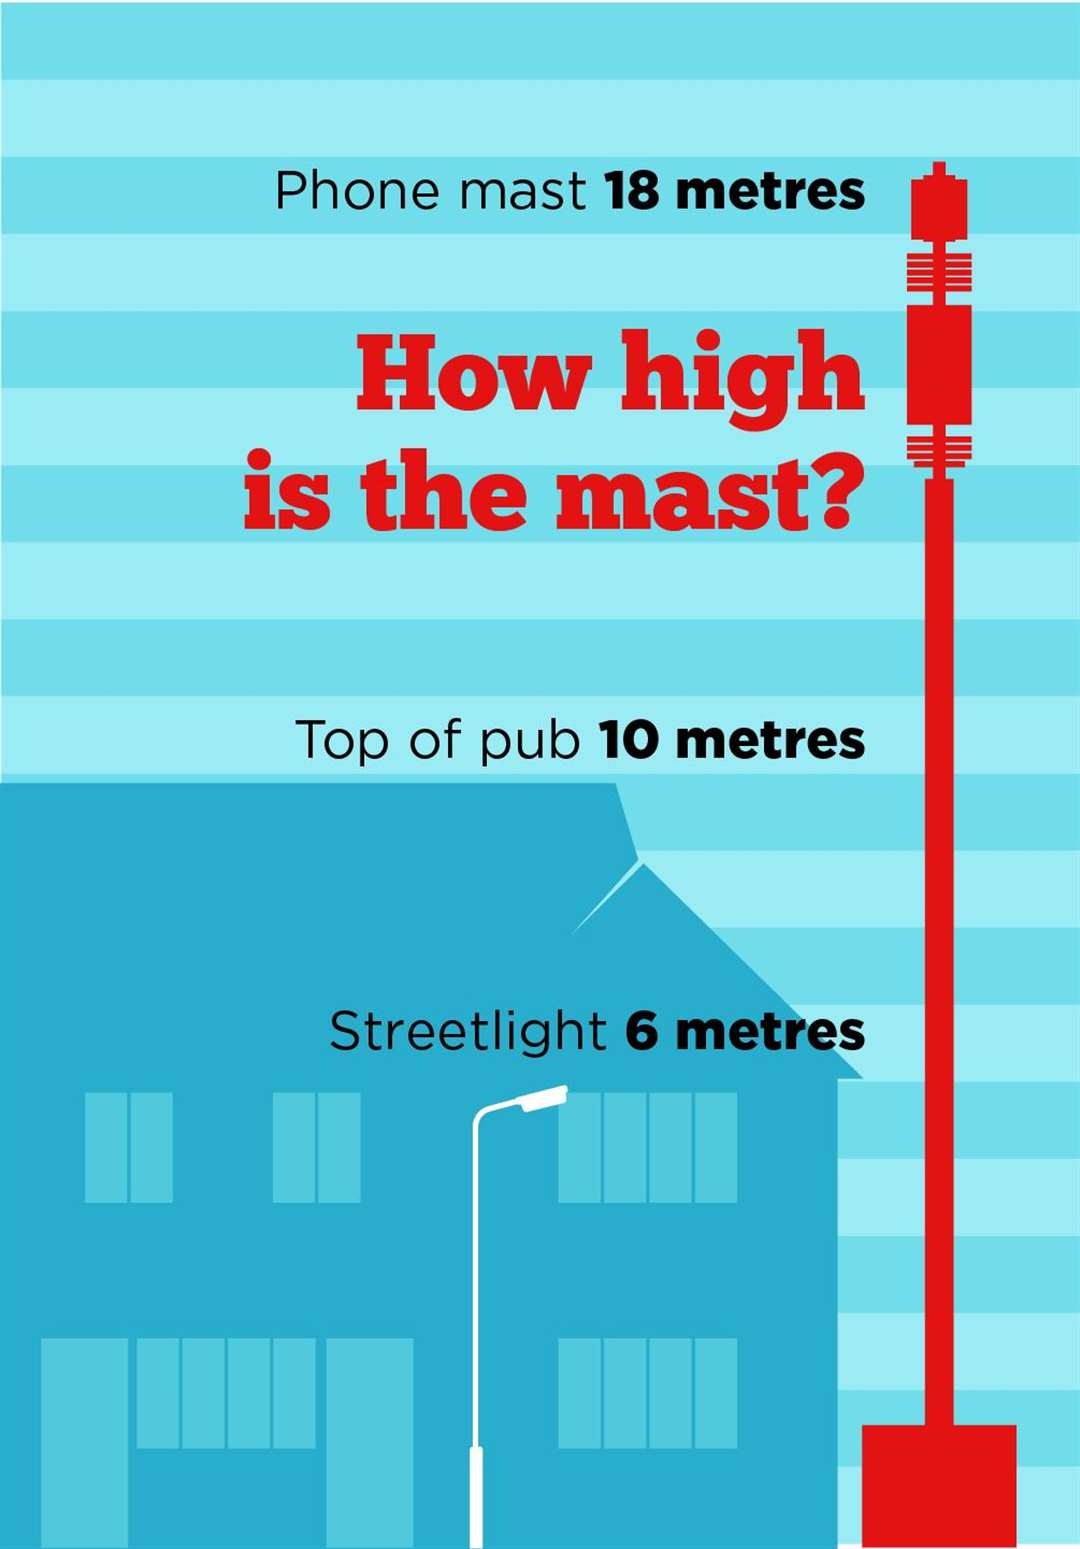 The mobile phone mast would be 18 metres high